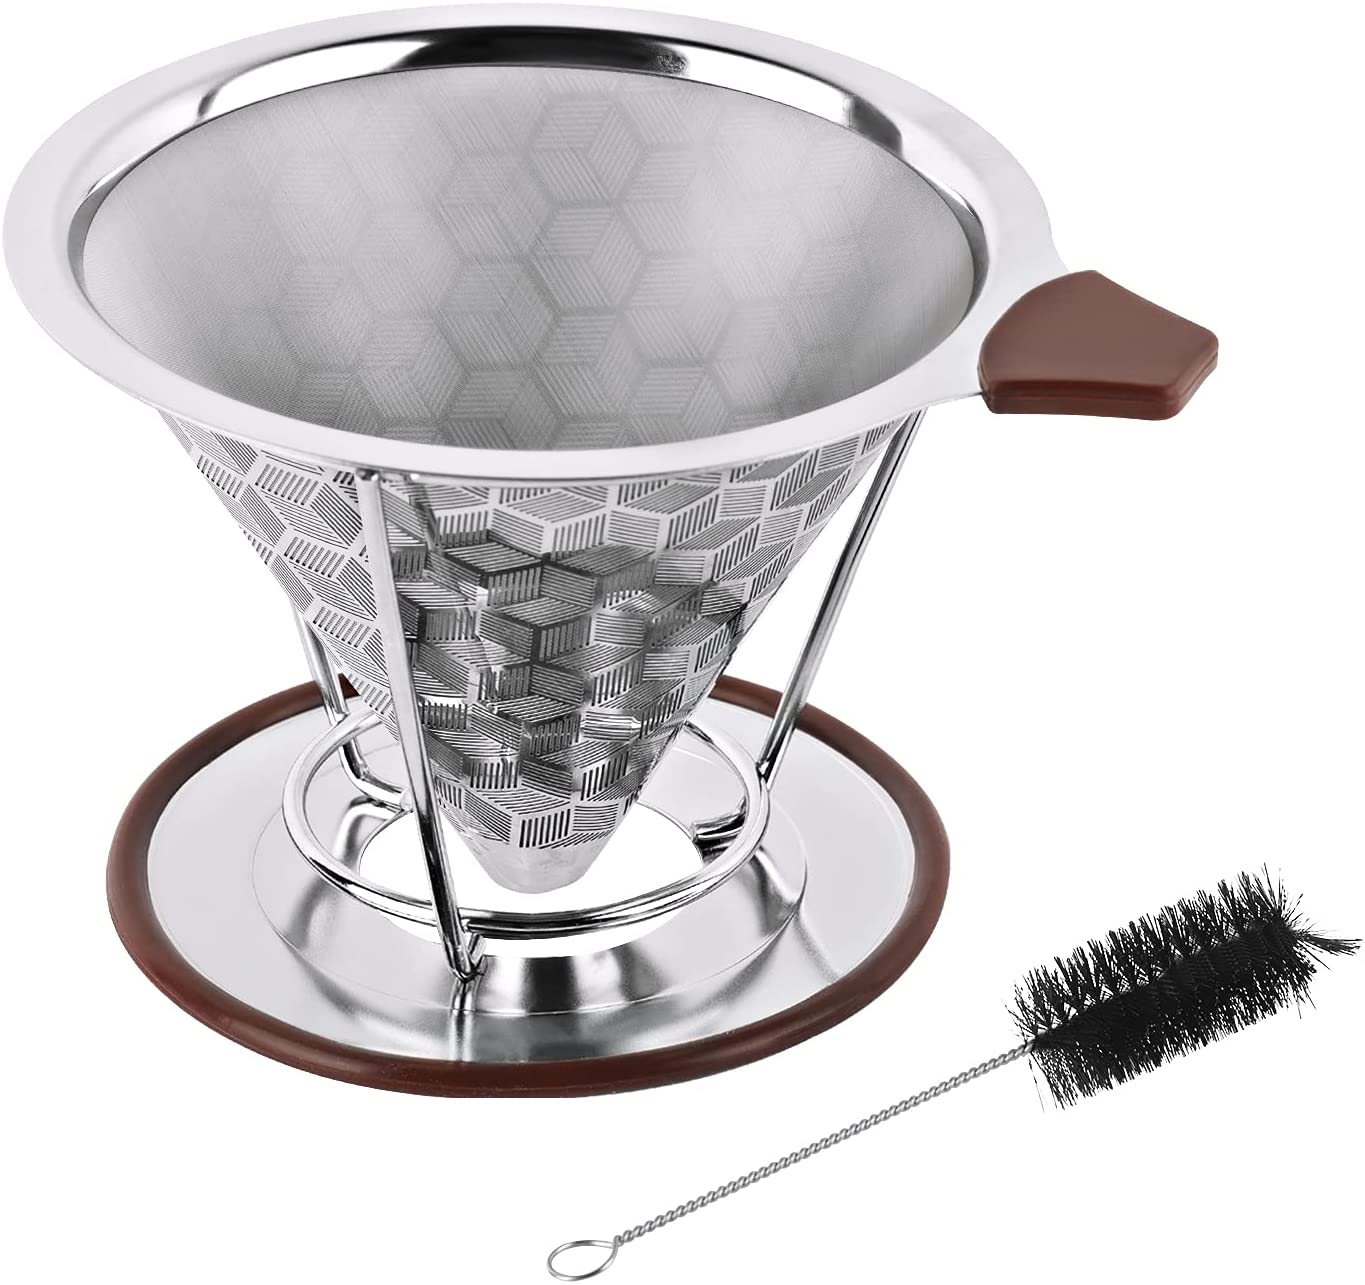 lifcasual Stainless Steel Coffee Filter, Permanent Coffee Filter, 1-4 Cup w